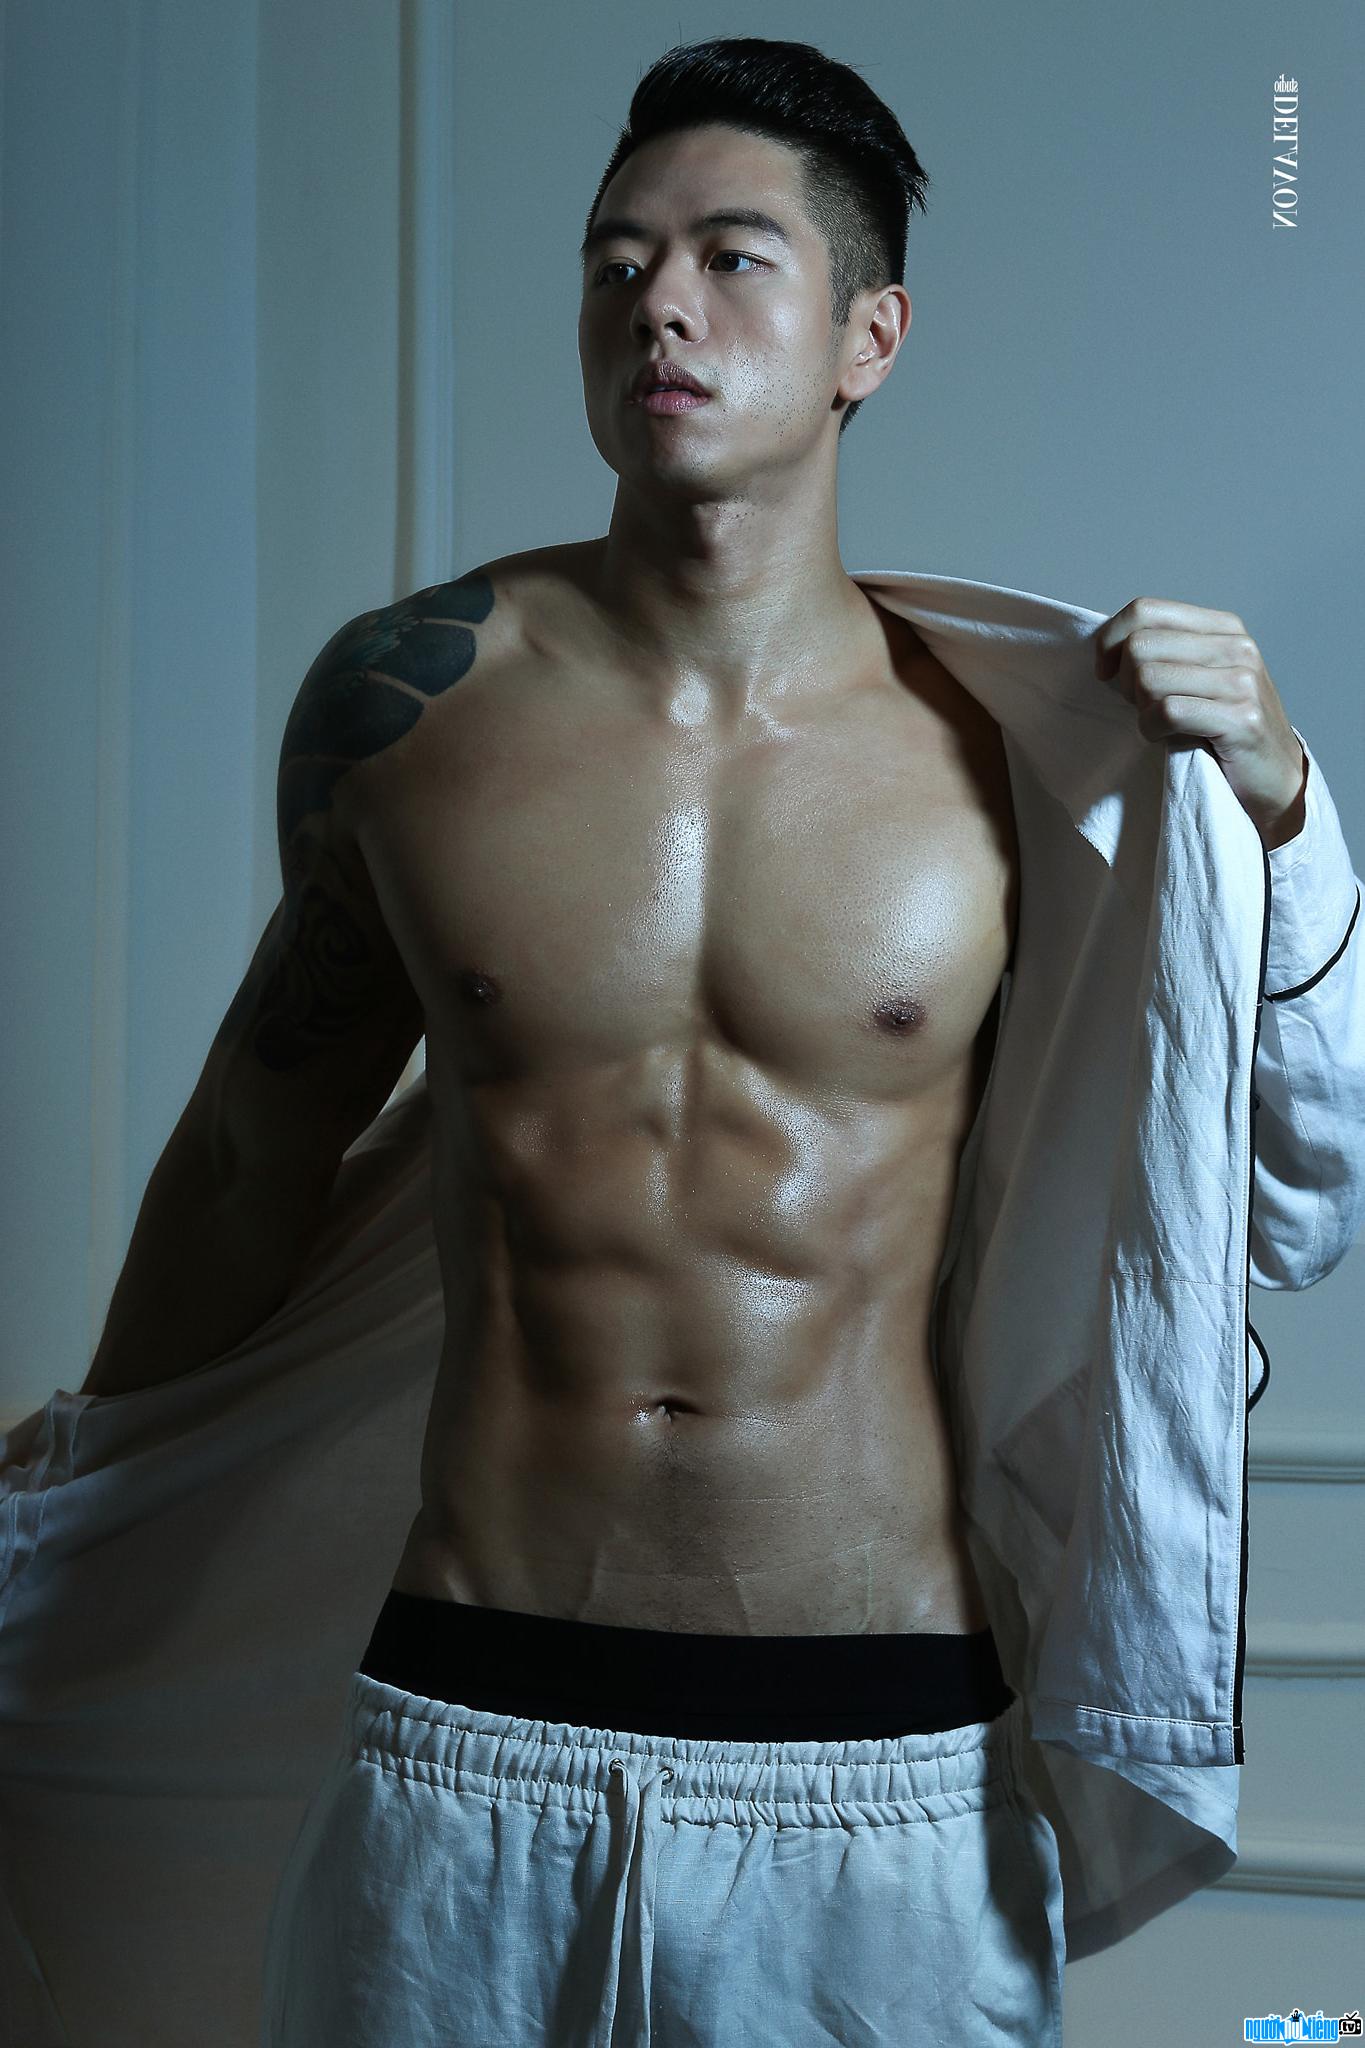  Attractive image of Michael Truong's 6-pack abs